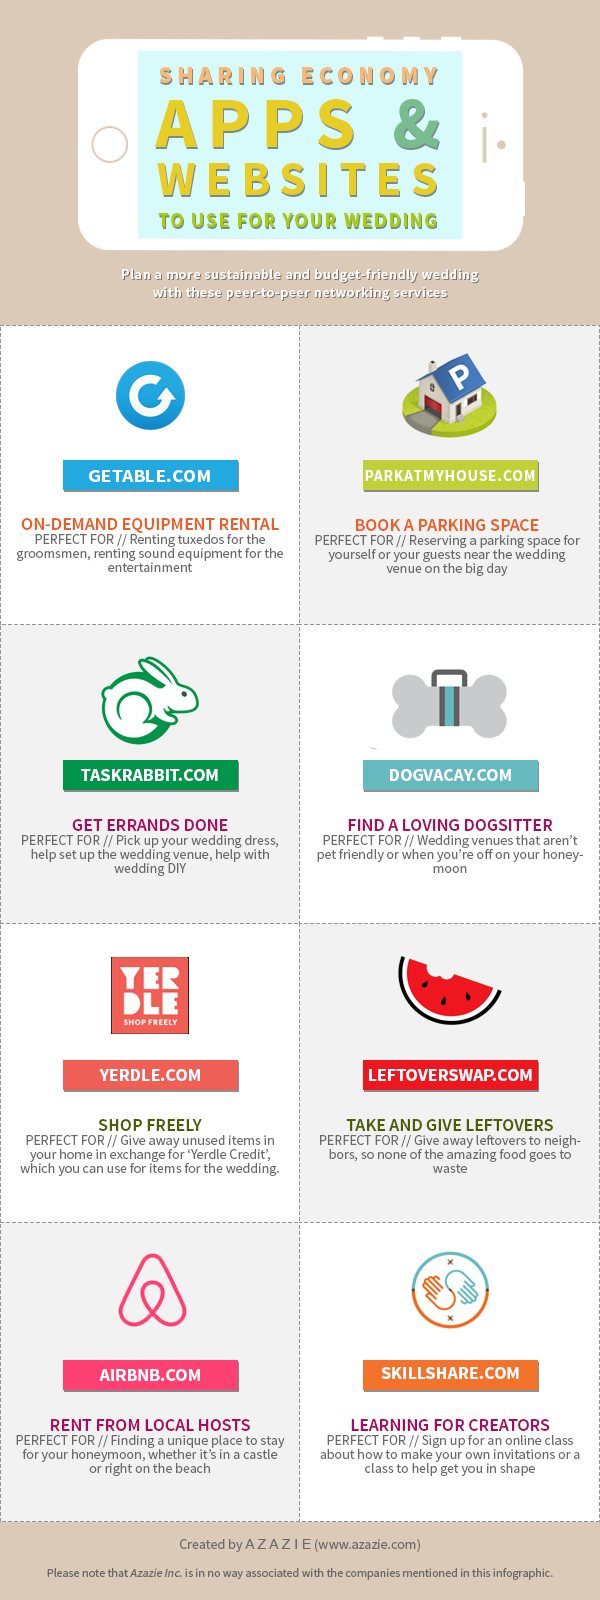 Sharing Economy Sites For Your Wedding Infographic